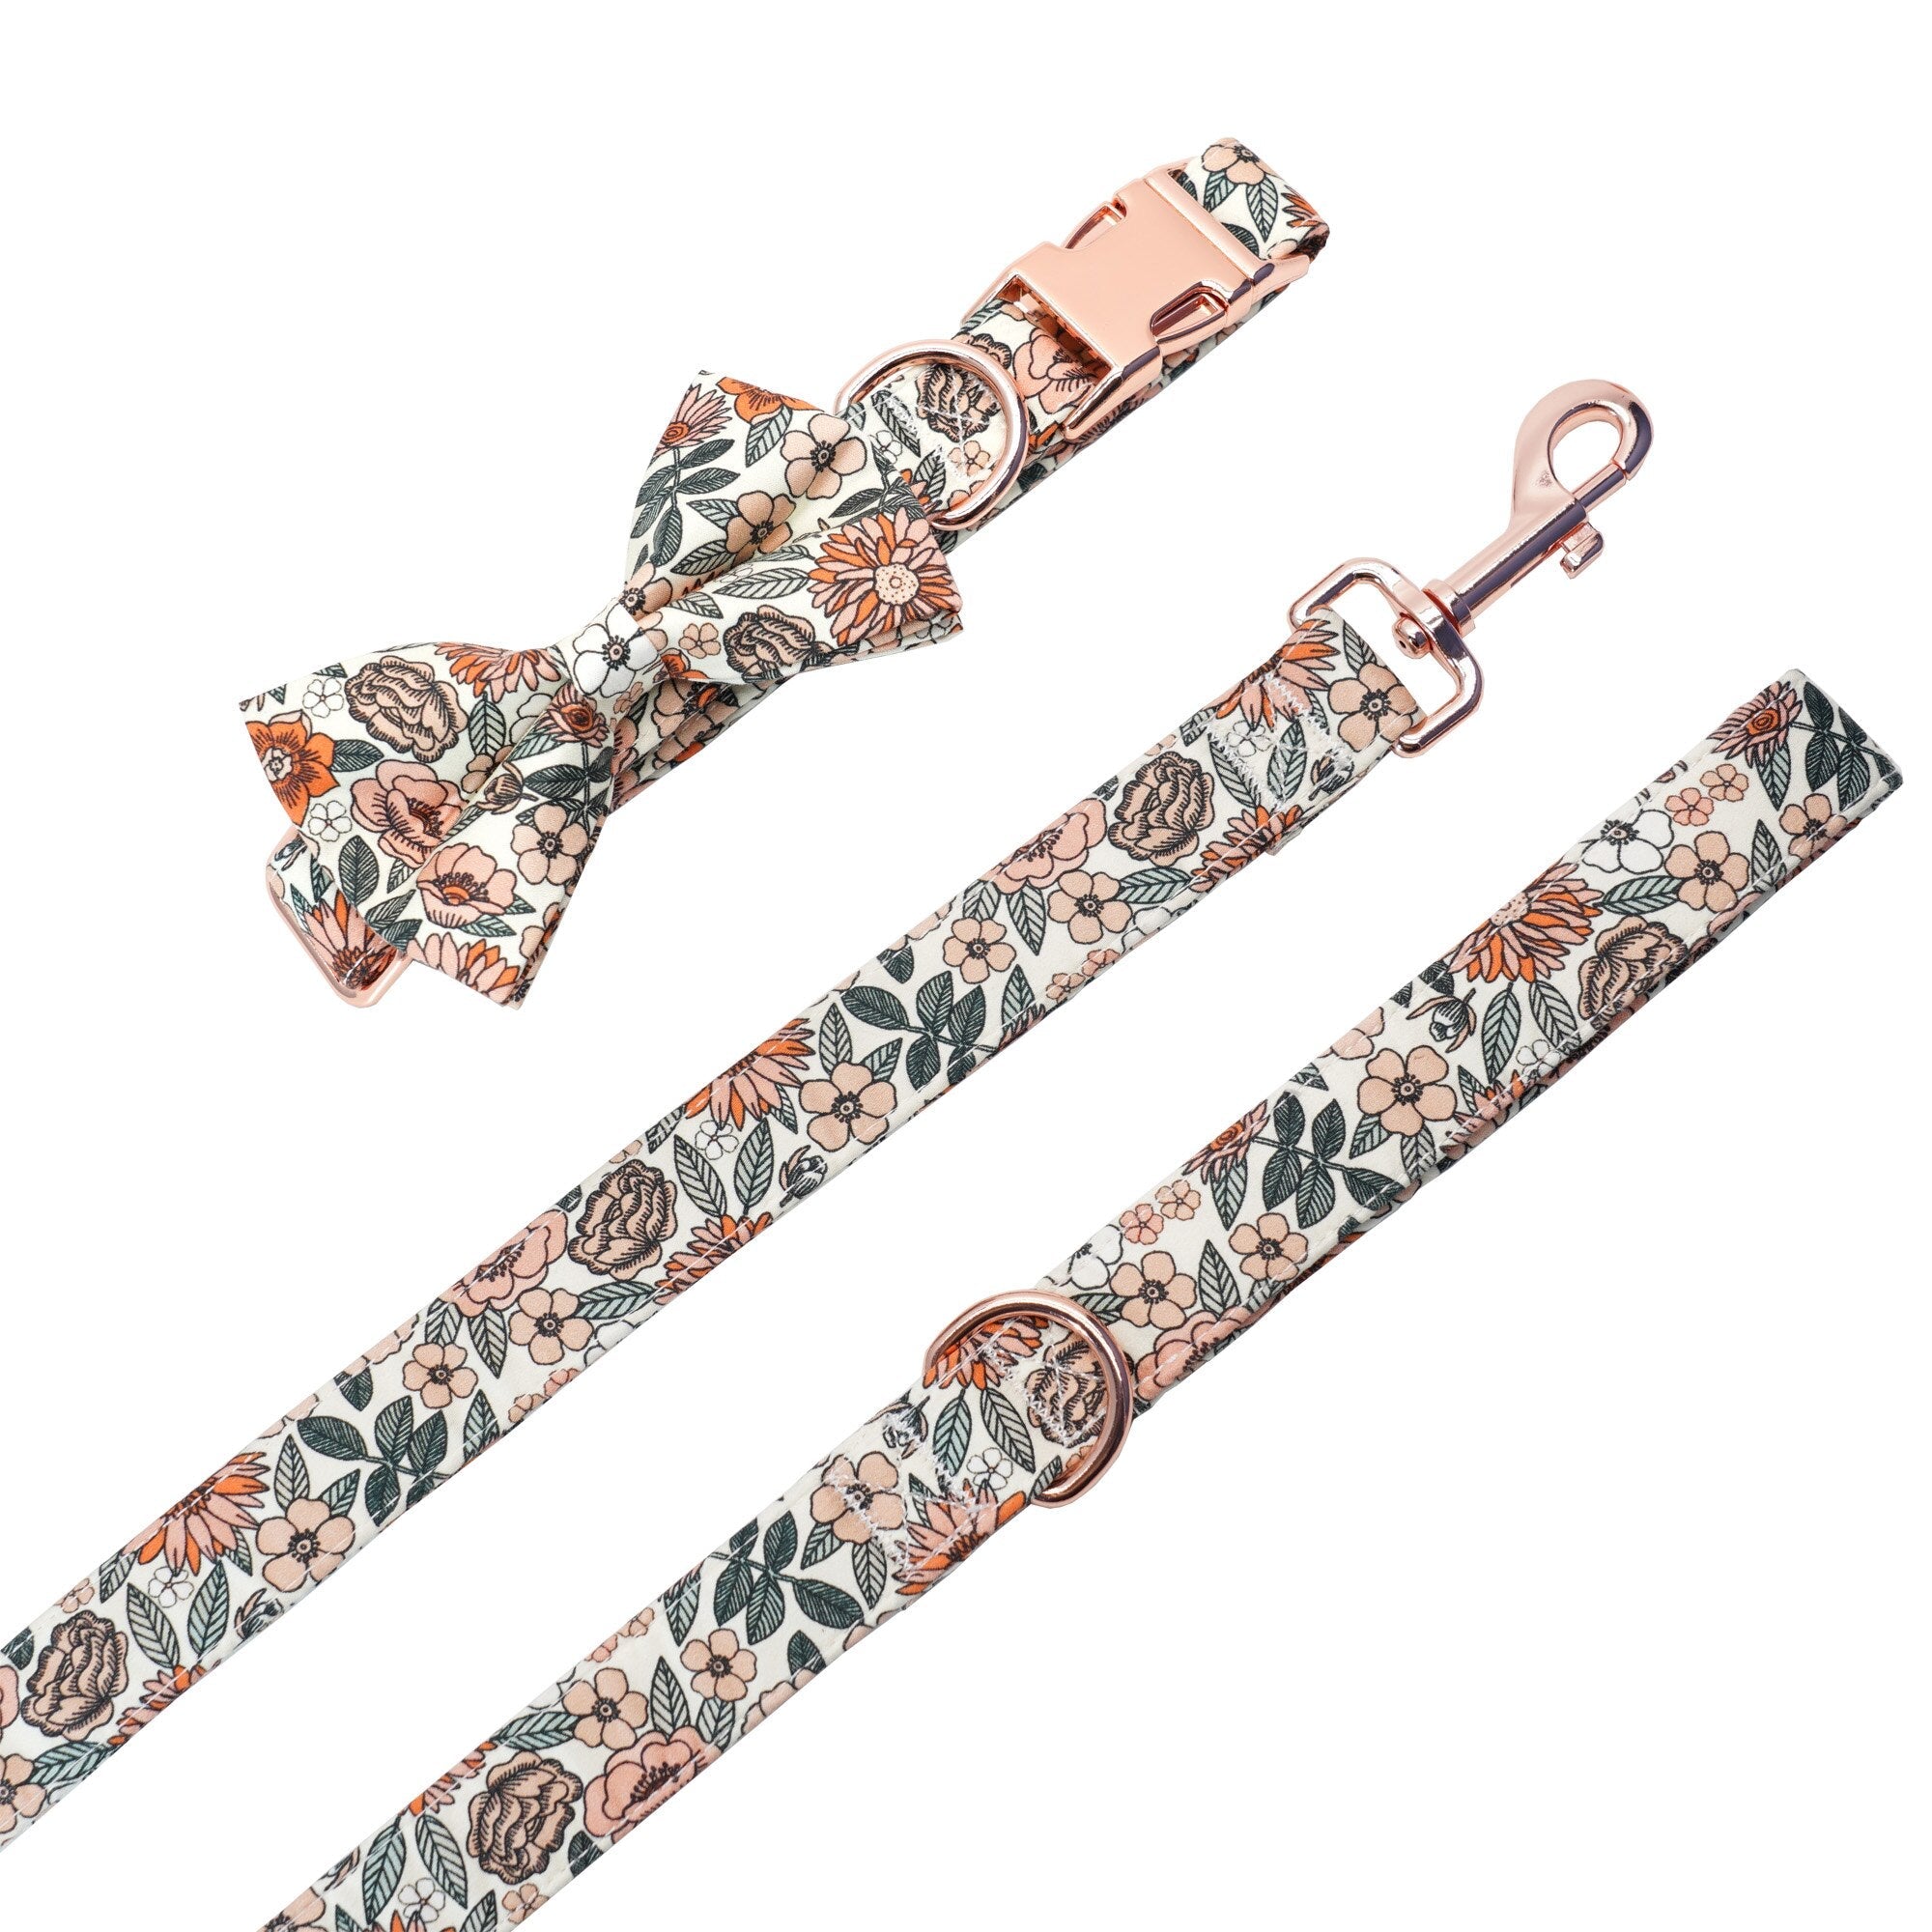 Boho Floral Bow Collar And Leash: Personalized Bow Collar And Leash Set - CurliTail